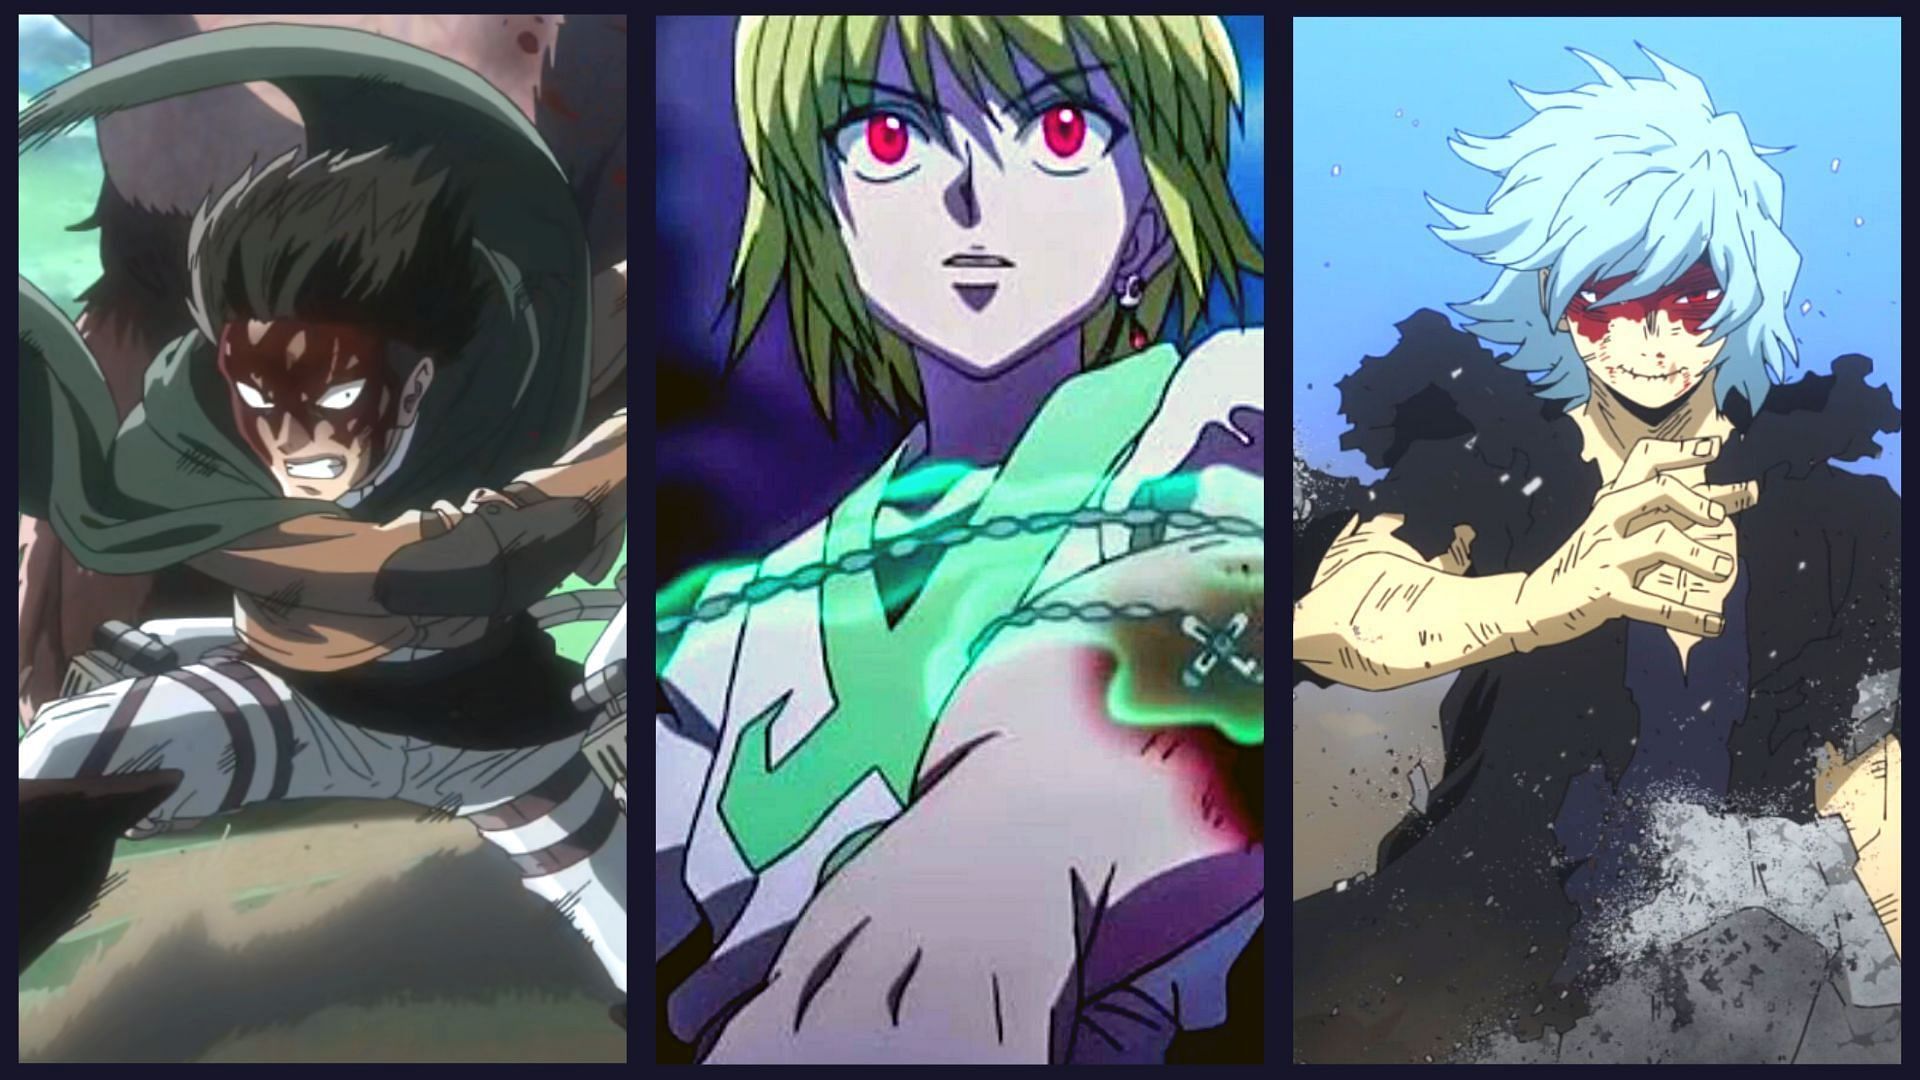 10 Anime Villains That Have Unearned Tragic Backstories